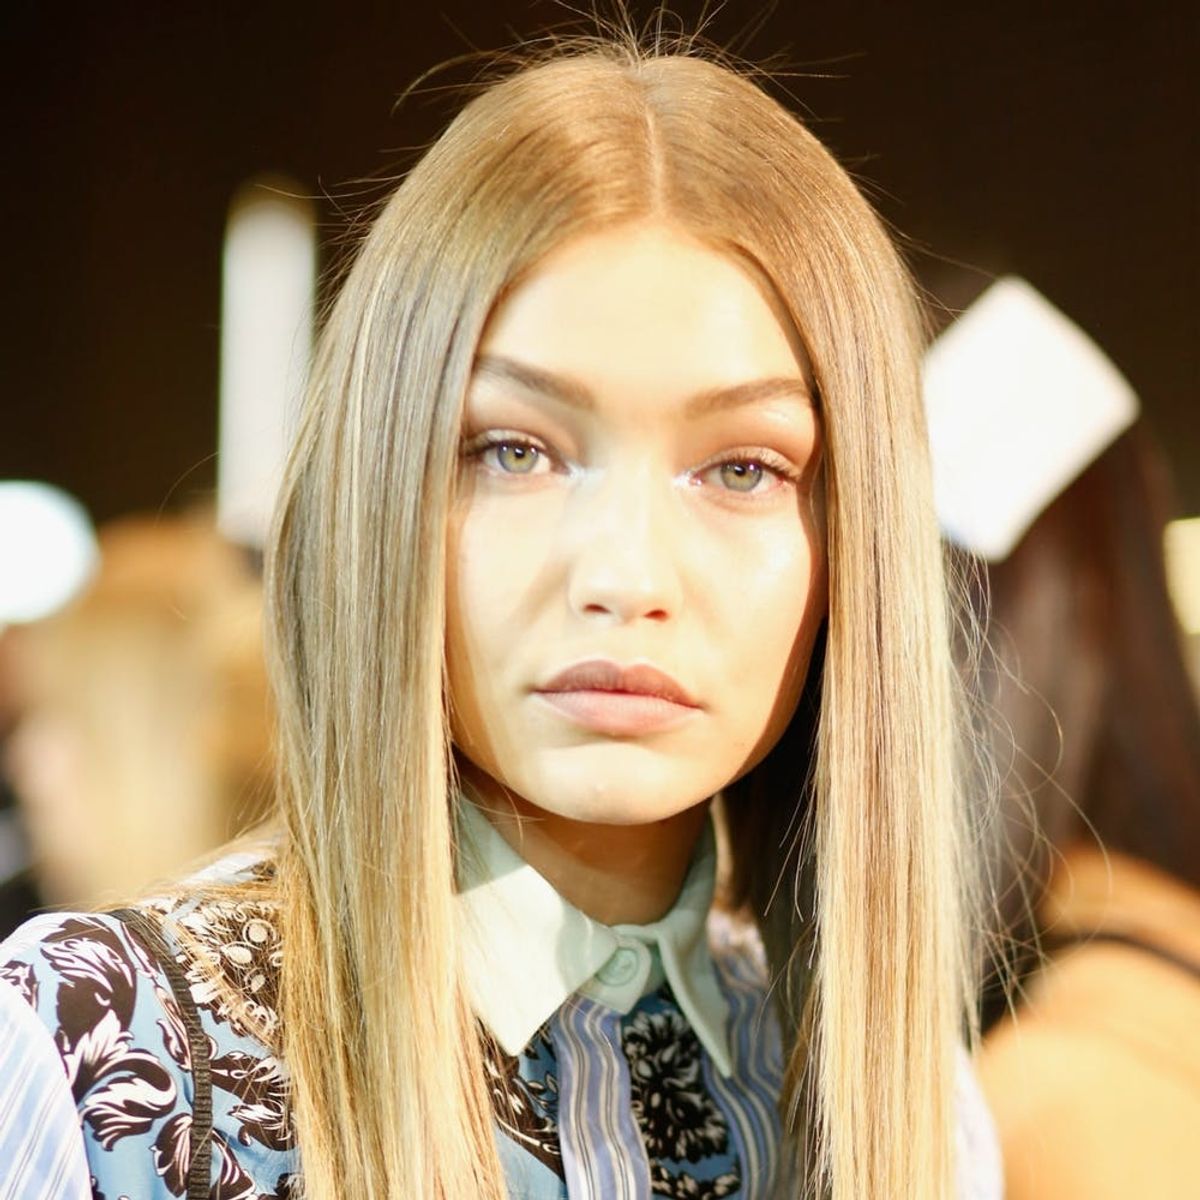 This Is the Ridiculous Excuse Gigi Hadid’s Attacker Gave for Lifting Her Up Off the Ground